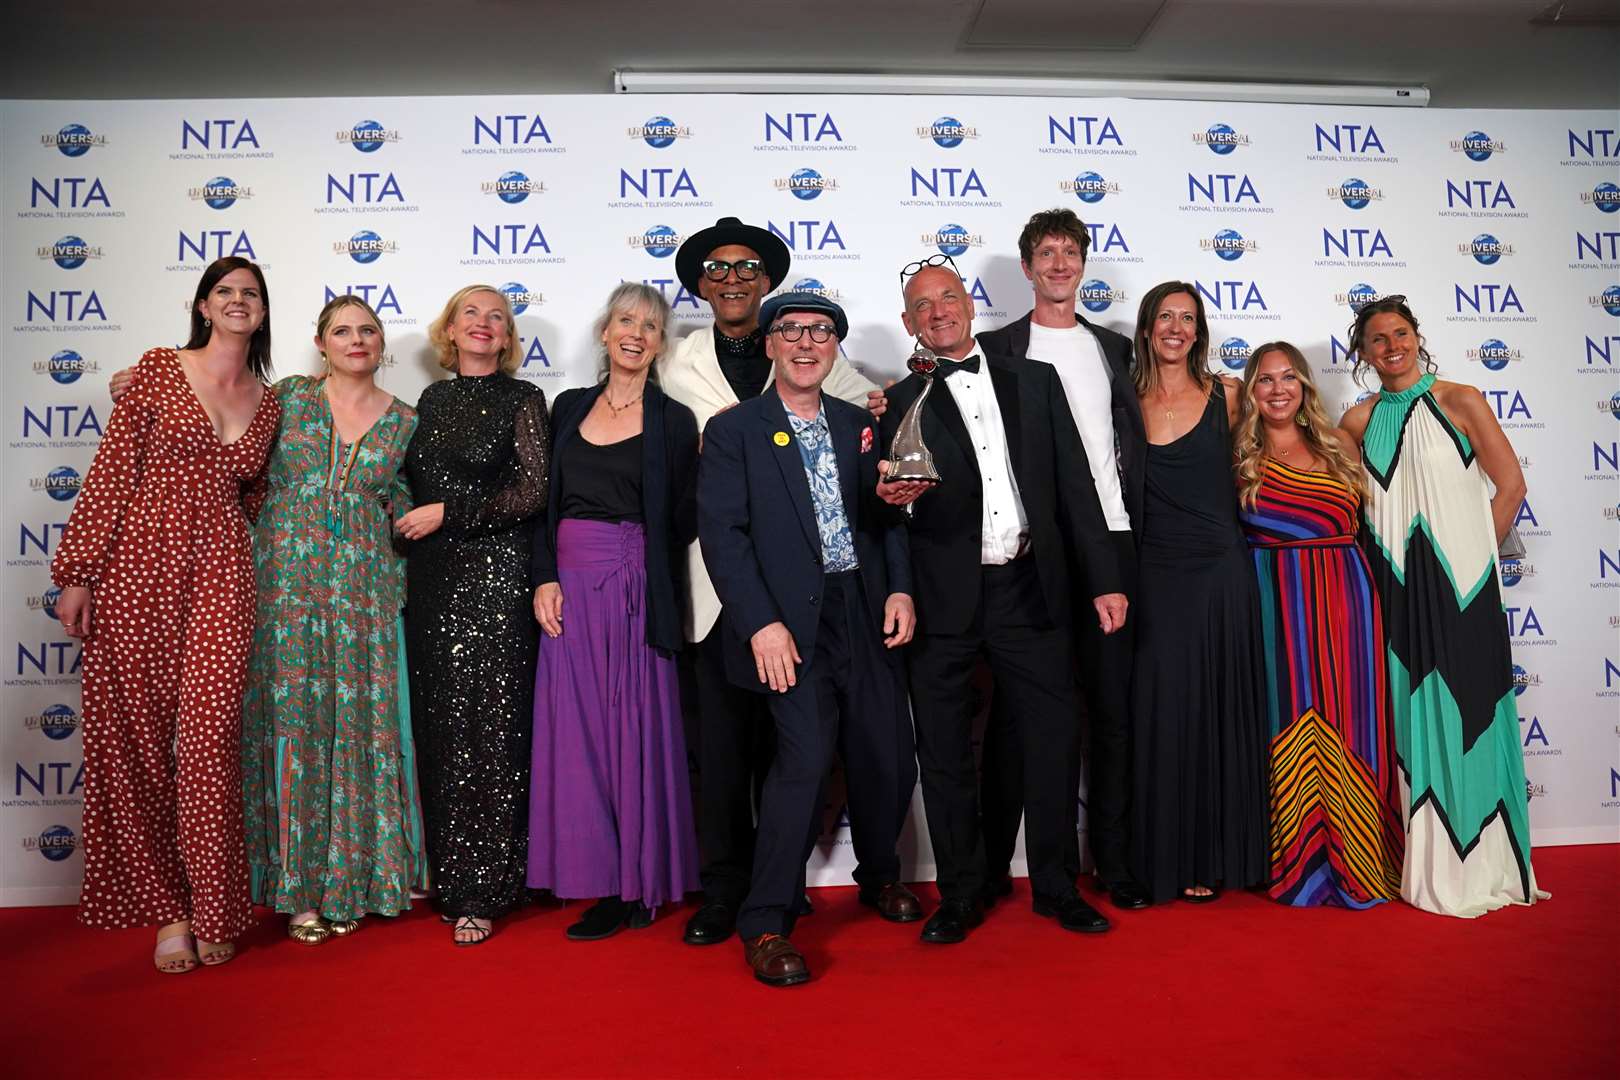 Jay Blades and The Repair Shop team after winning the daytime award at the National Television Awards (Lucy North/PA)